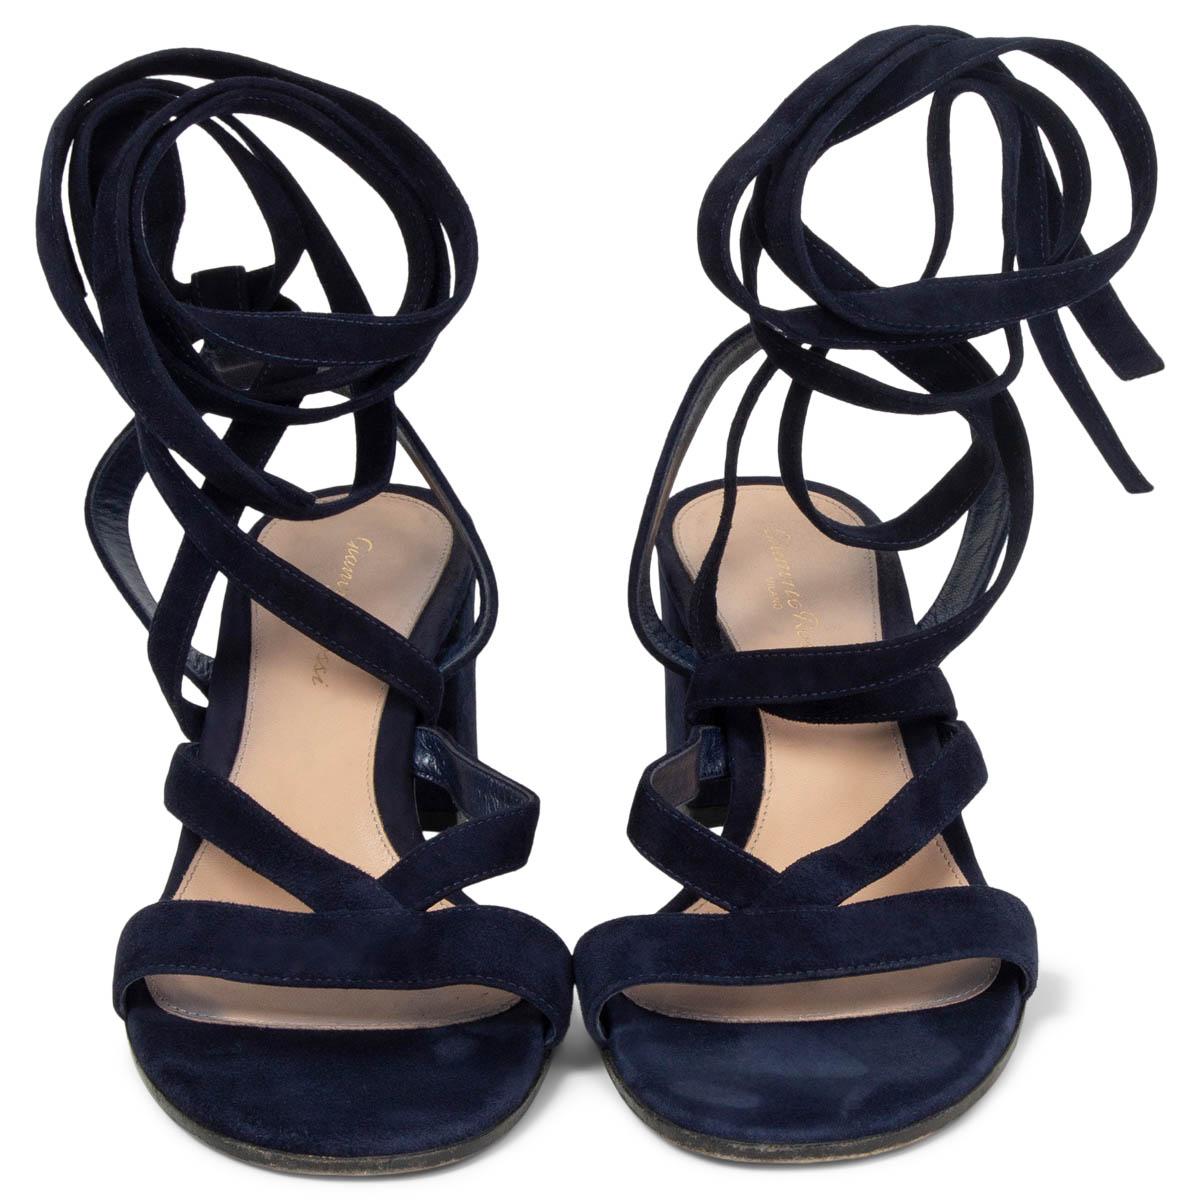 100% authentic Gianvito Rossi Janis 60 lace-up sandals in navy blue suede with block heel. Have been worn and are in excellent condition. (Show heavy wear on sole). Come with dust bag. 

Measurements
Imprinted Size	38
Shoe Size	38
Inside Sole	25cm